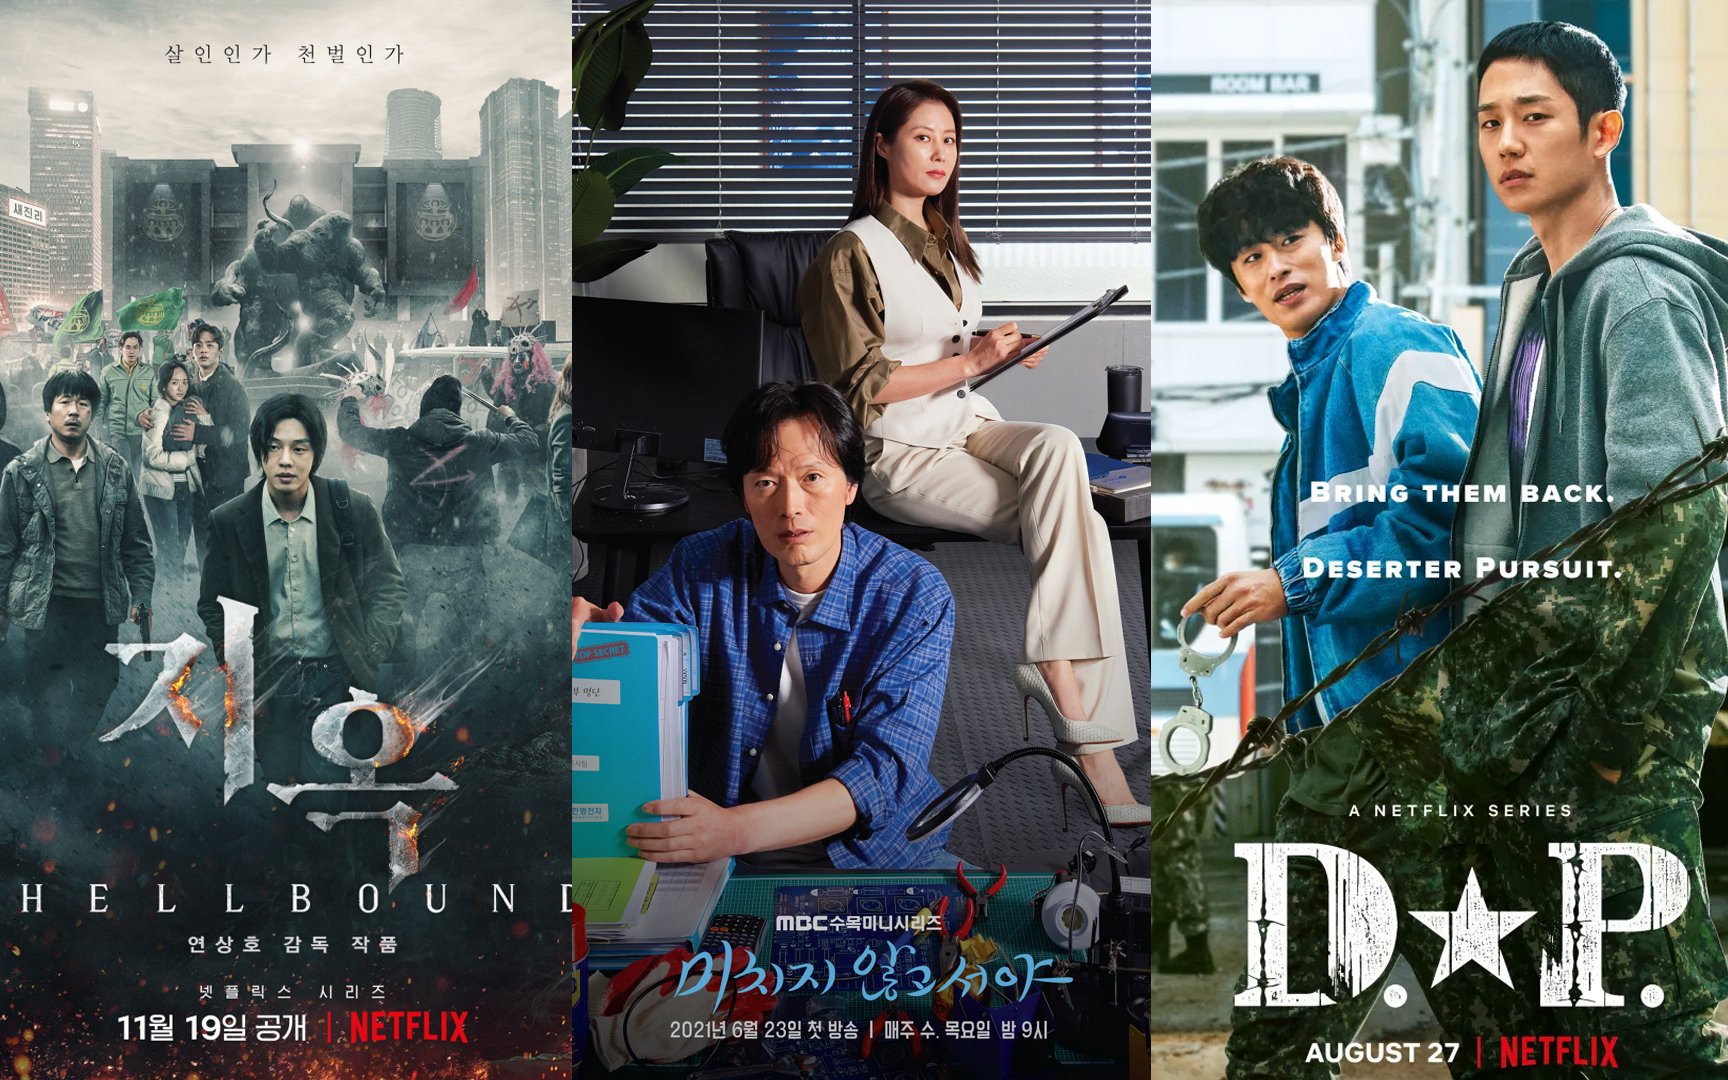 The Top 10 dramas of 2021 by Cine21